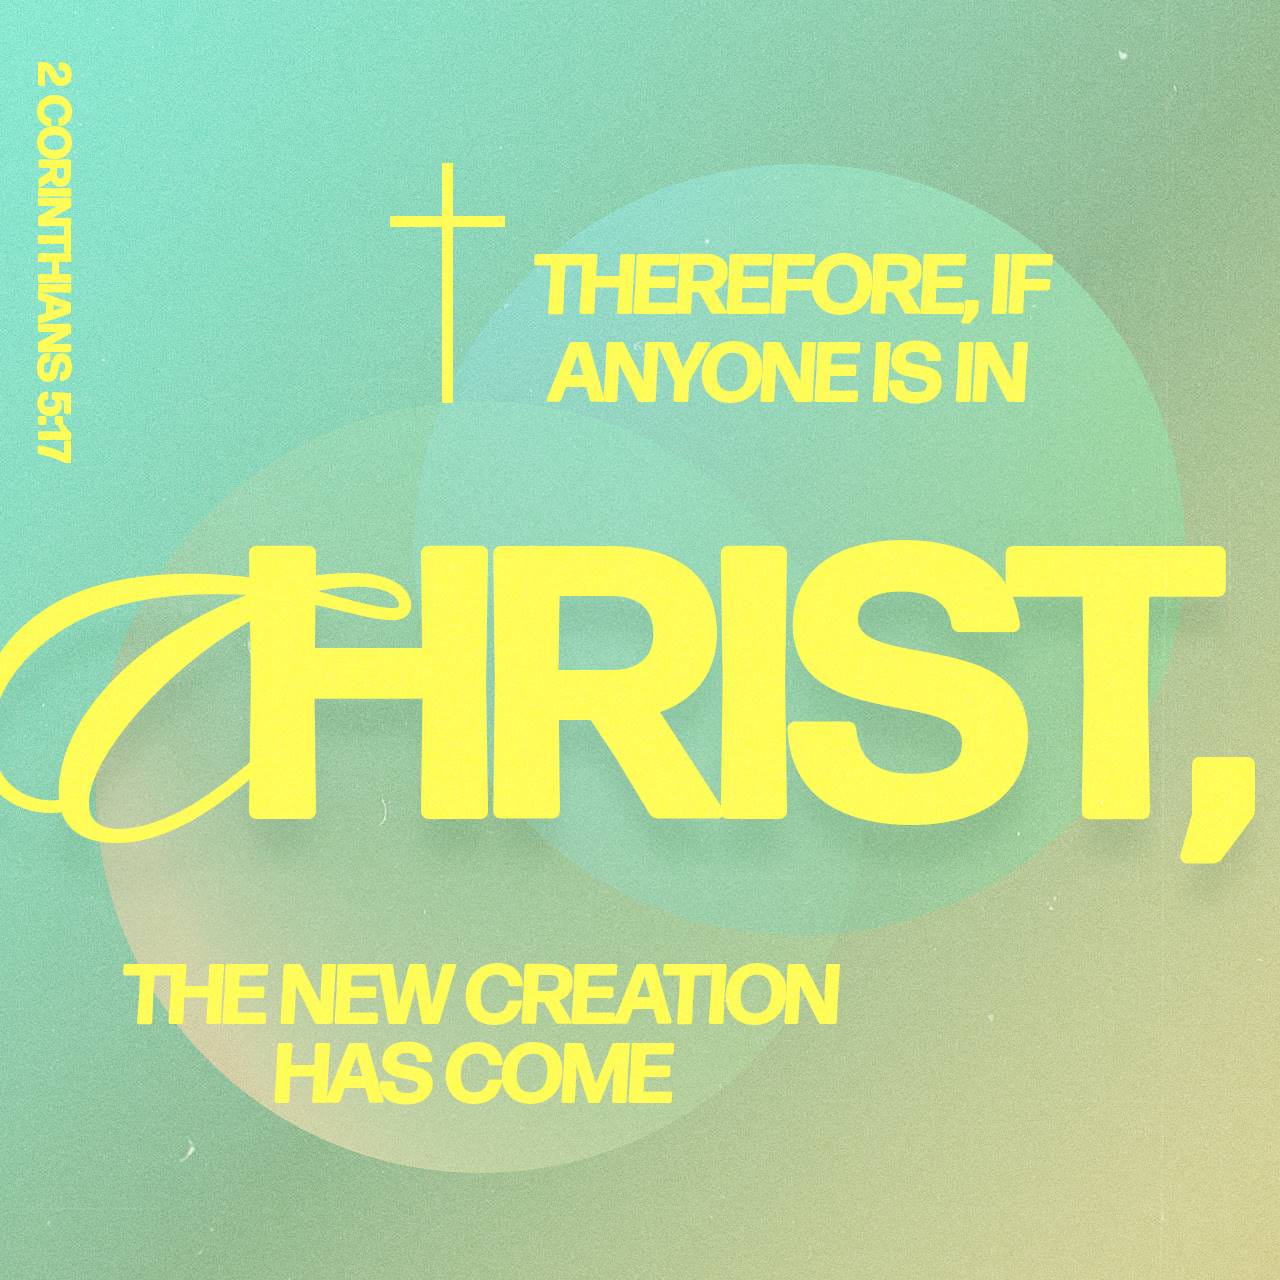 2 Corinthians 5:17 Therefore, if anyone is in Christ, he is a new creation.  The old has passed away; behold, the new has come. Because of this decision  we don't evaluate people